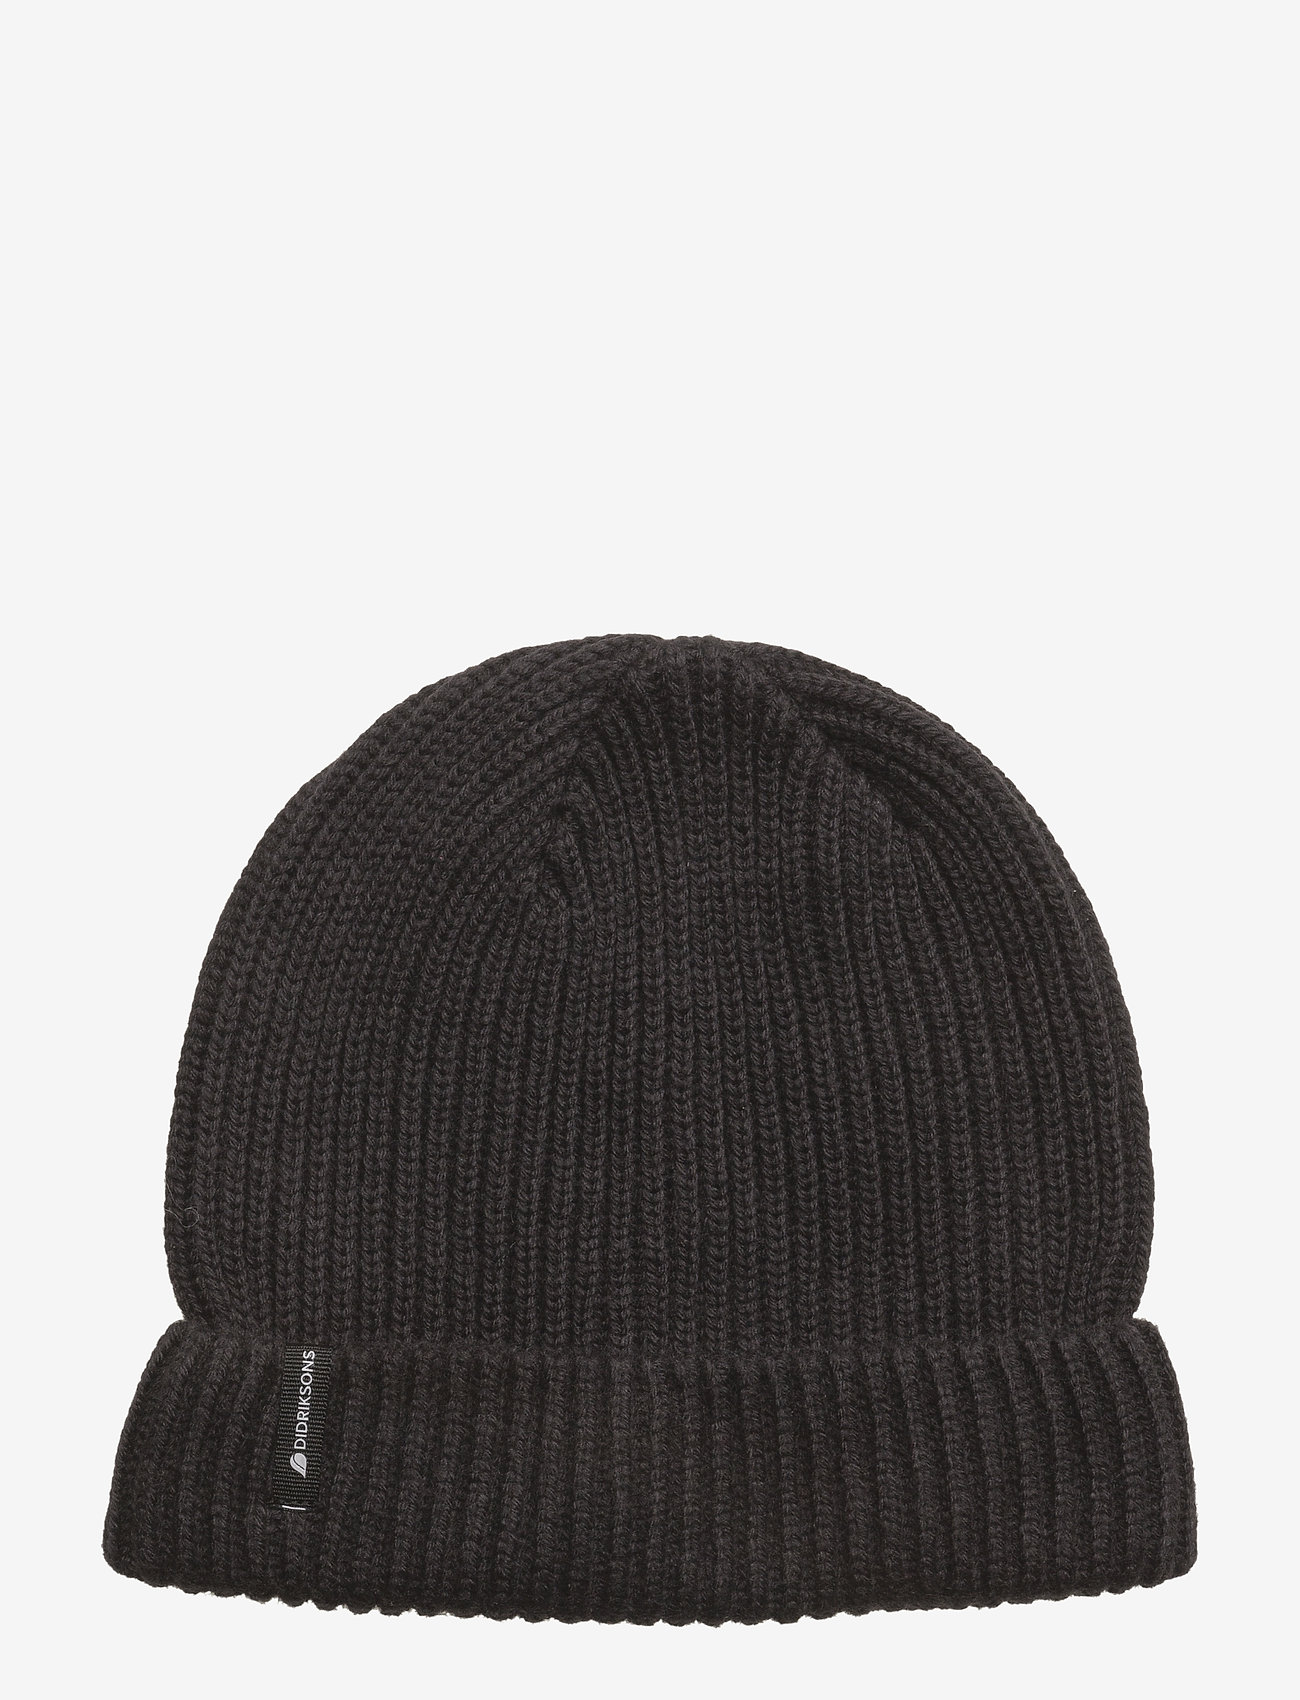 youth knit hats